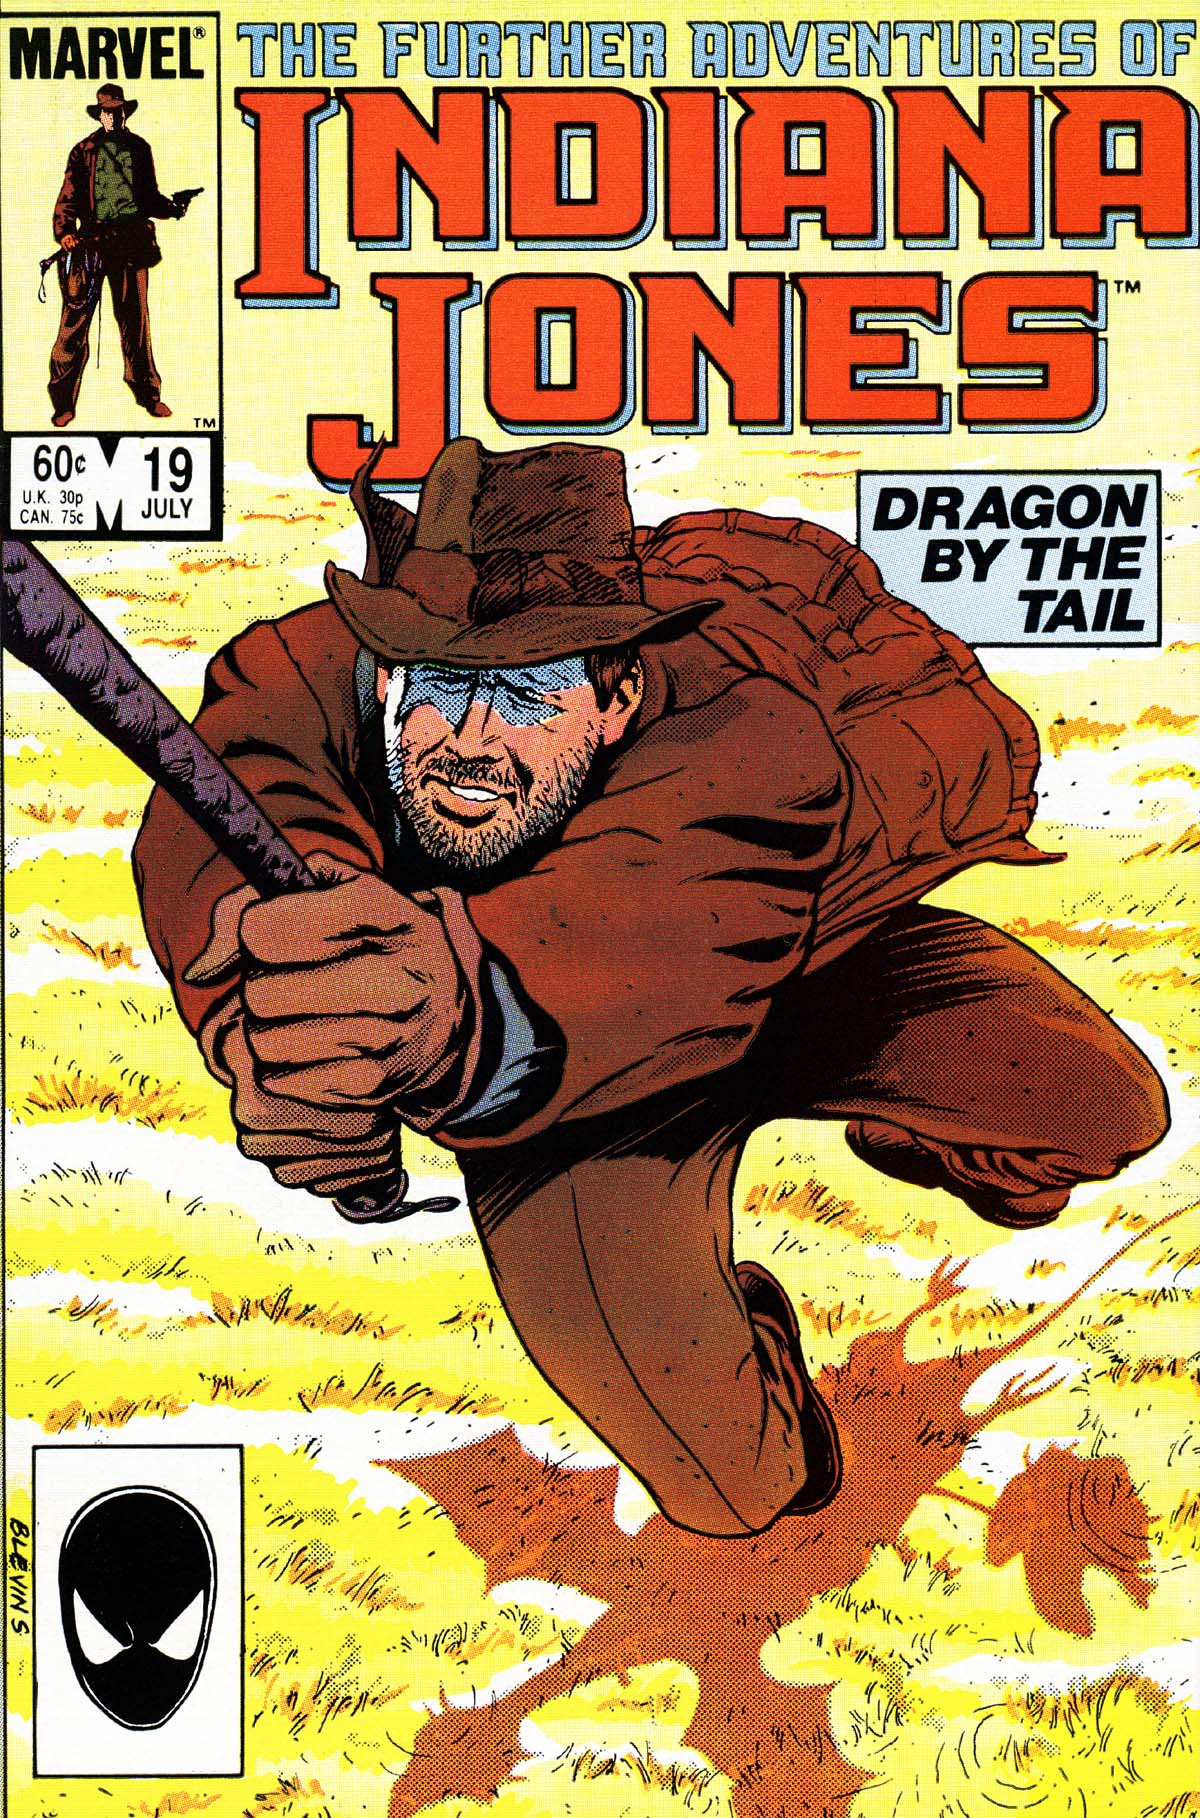 Read online The Further Adventures of Indiana Jones comic -  Issue #19 - 1